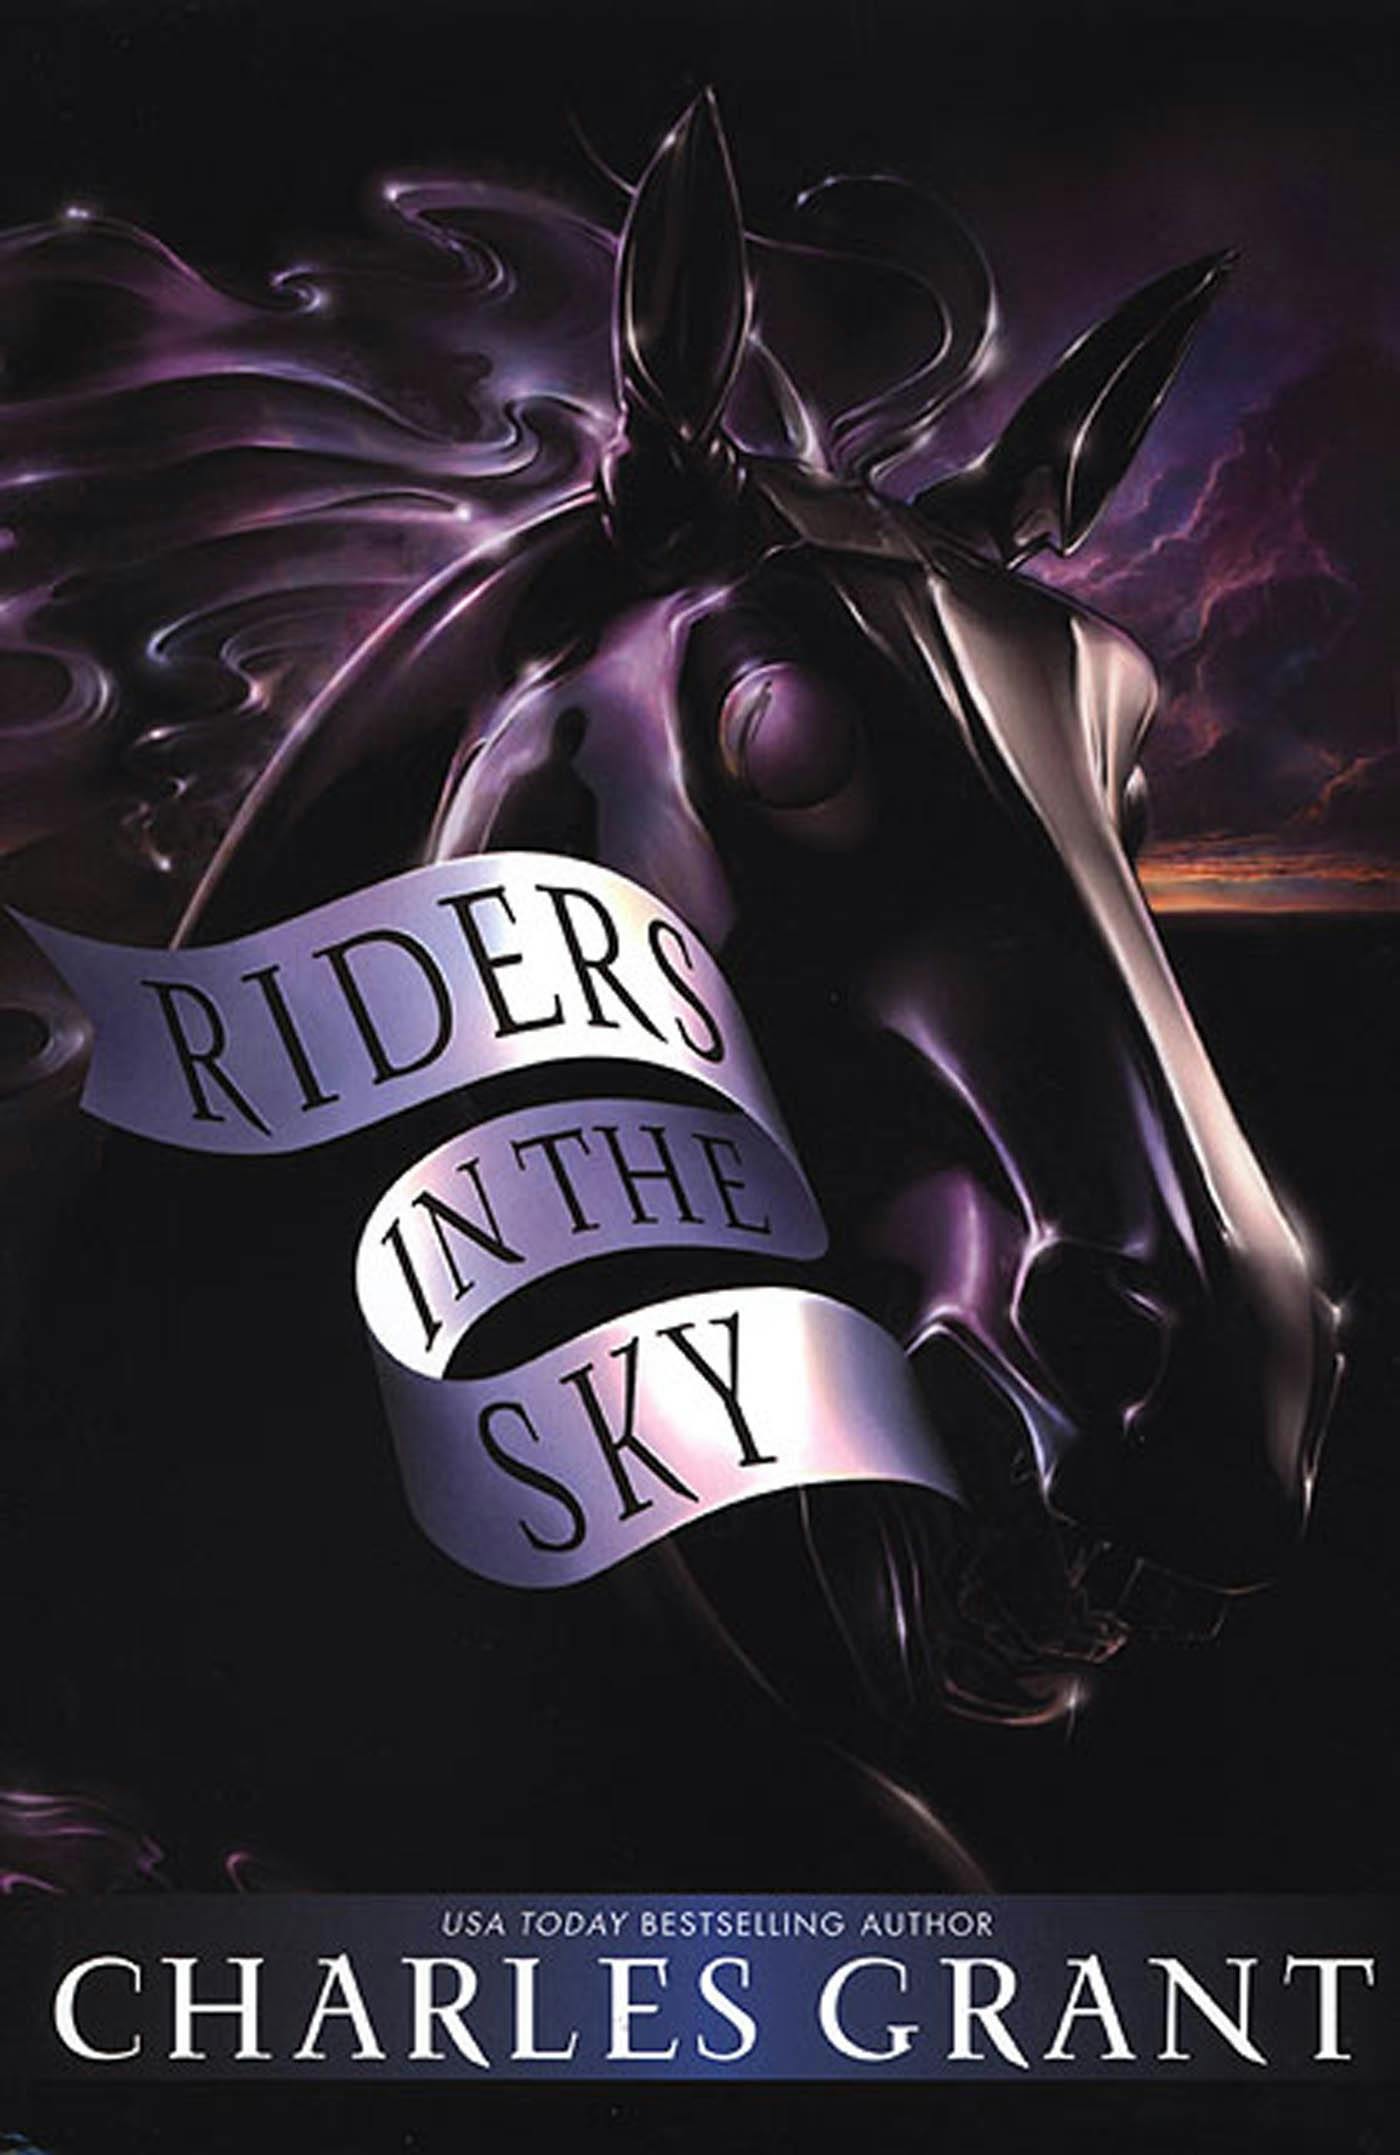 Cover for the book titled as: Riders in the Sky